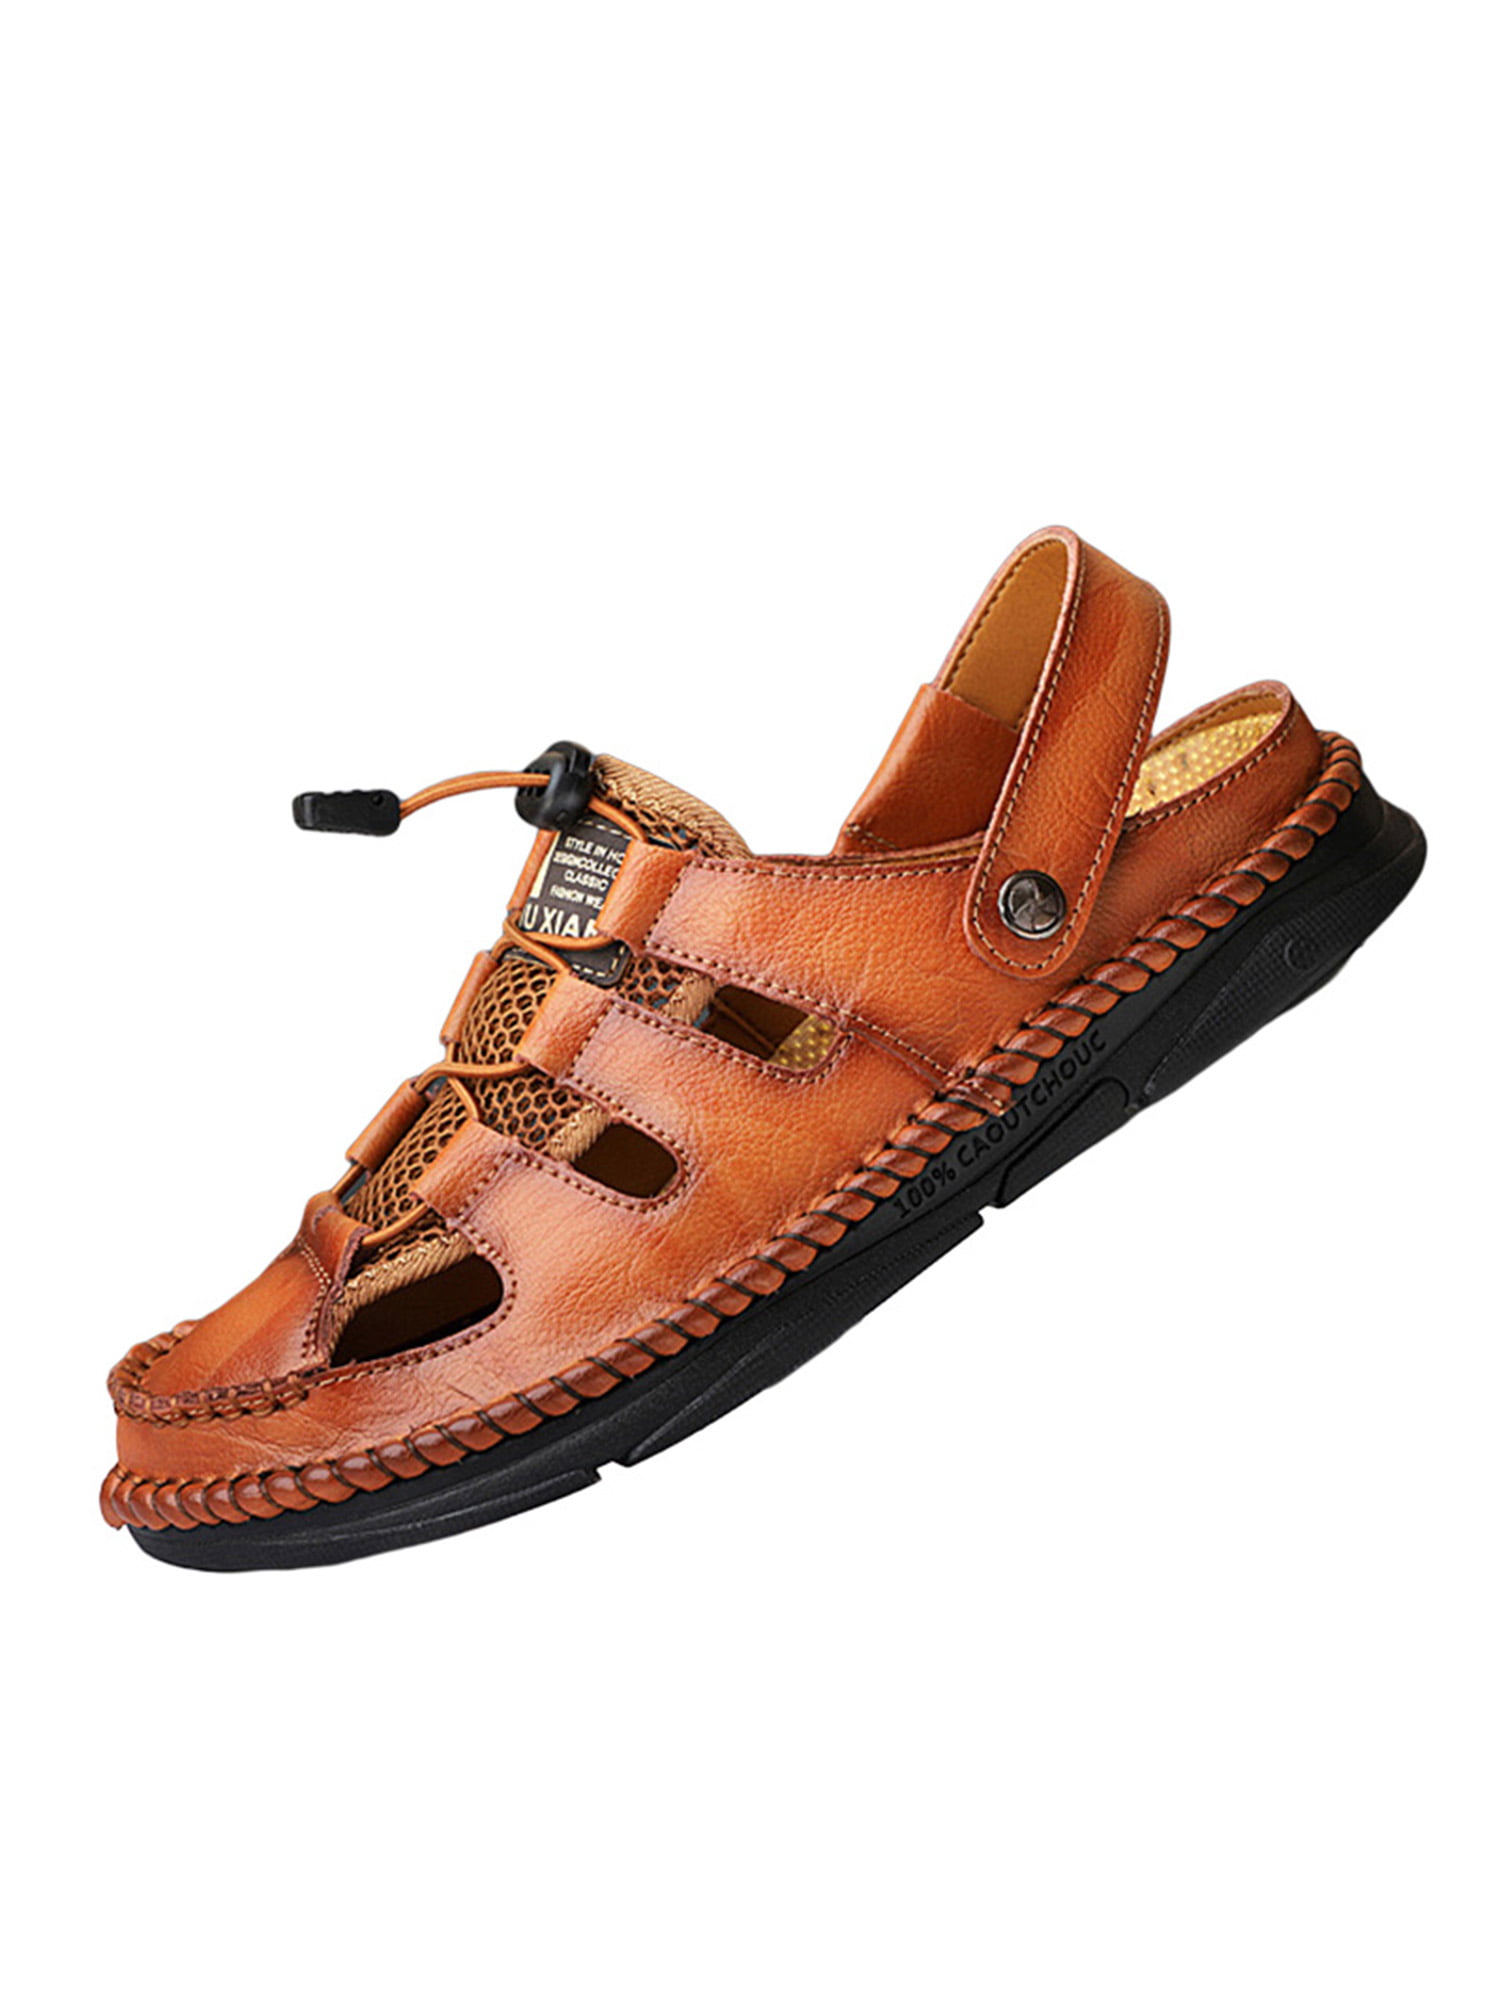 Men's Summer Hiking Leather Sandals Casual Breathable Closed Toe Fisherman Shoes 